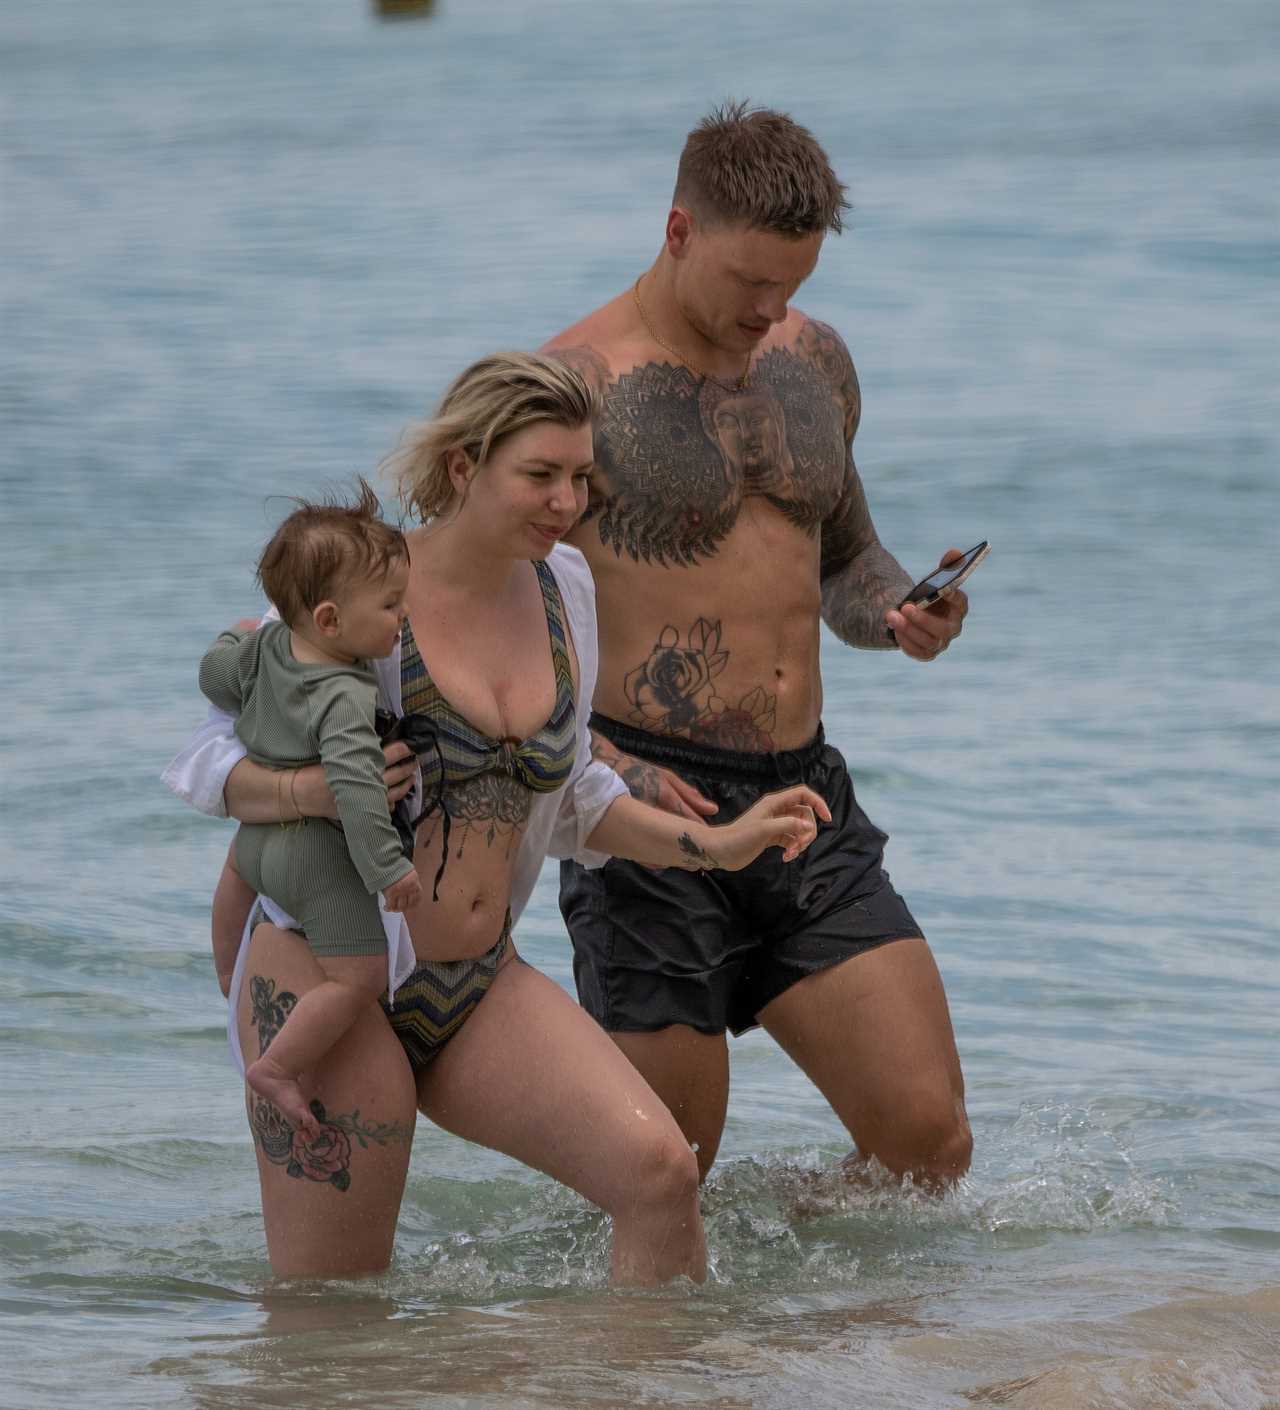 Olivia Bowen looks amazing in new plunging bikini as she hits the beach again on holiday with hubby Alex and son Abel